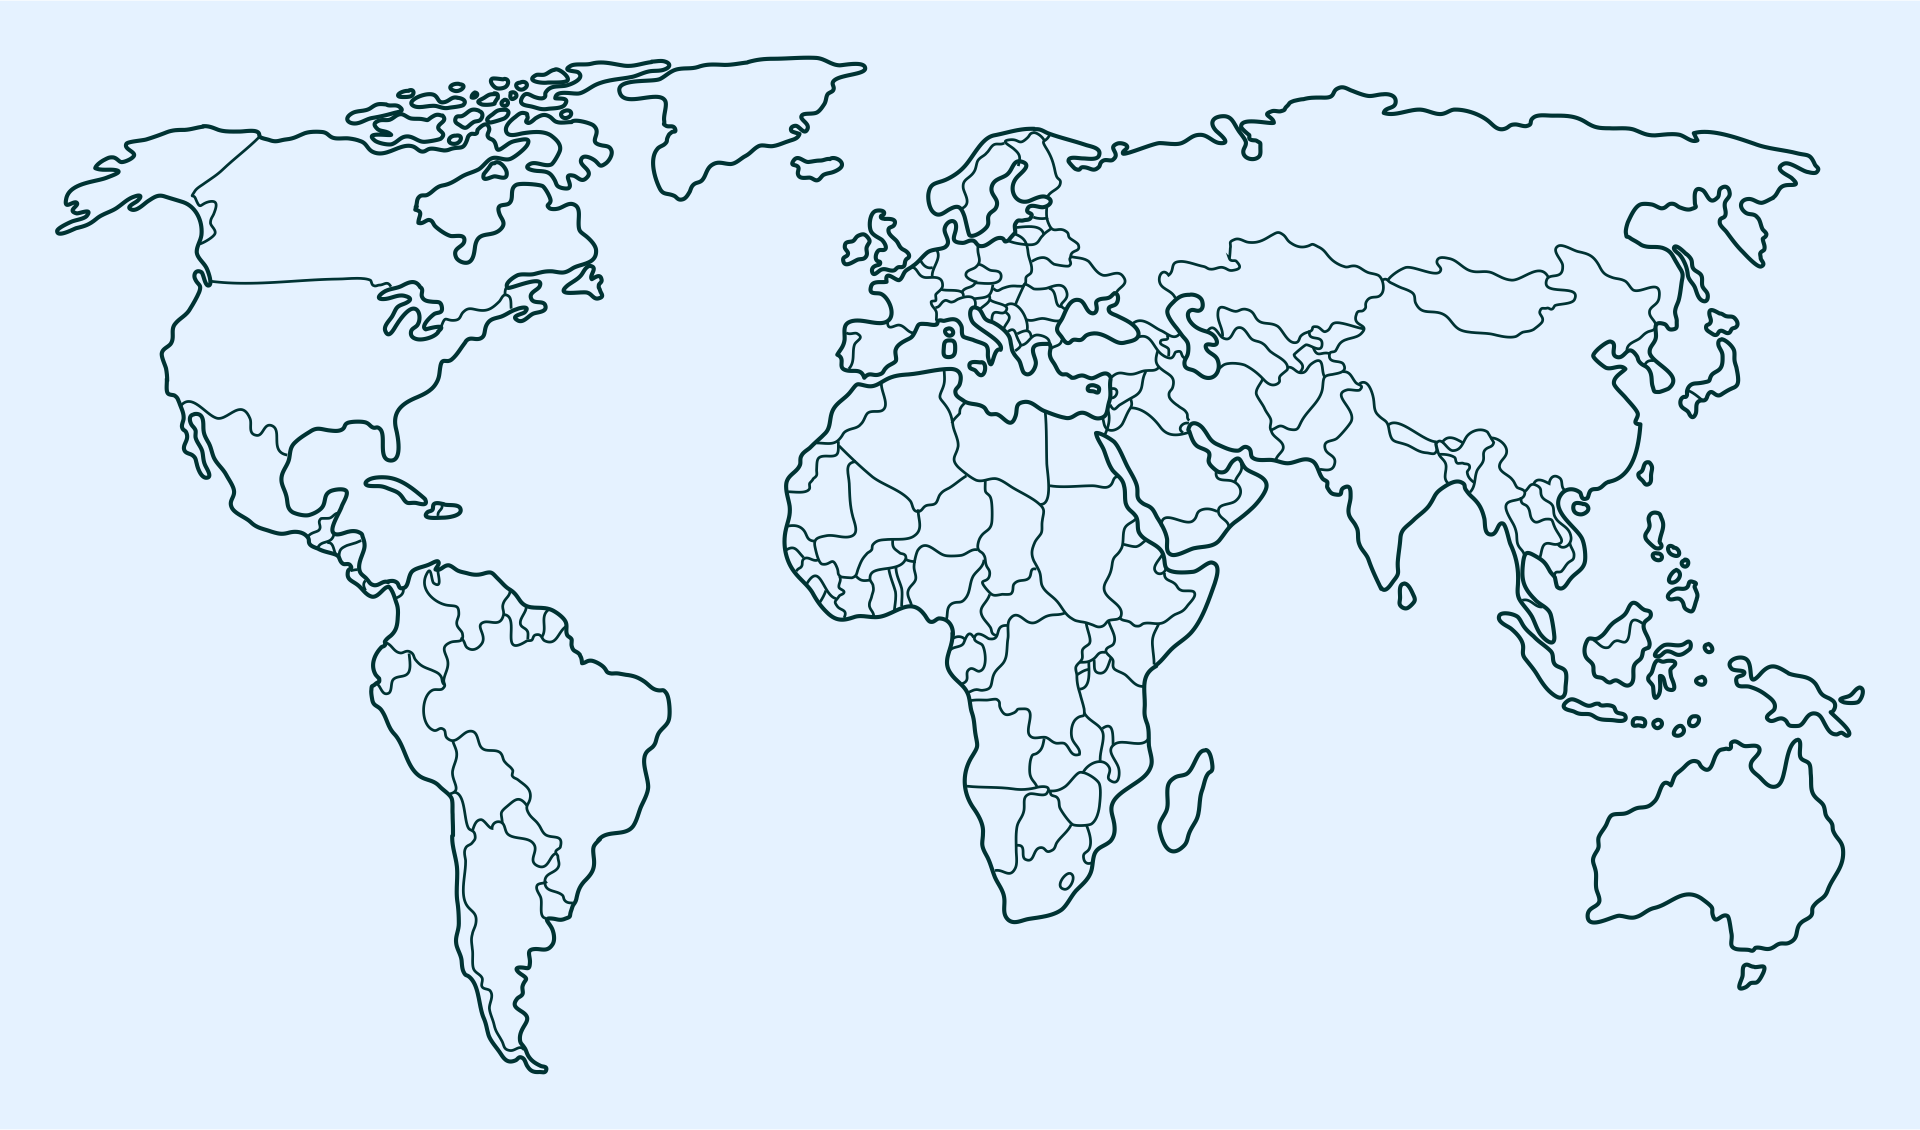 world-map-without-labels-map-of-middle-earth-without-labels-enjoy